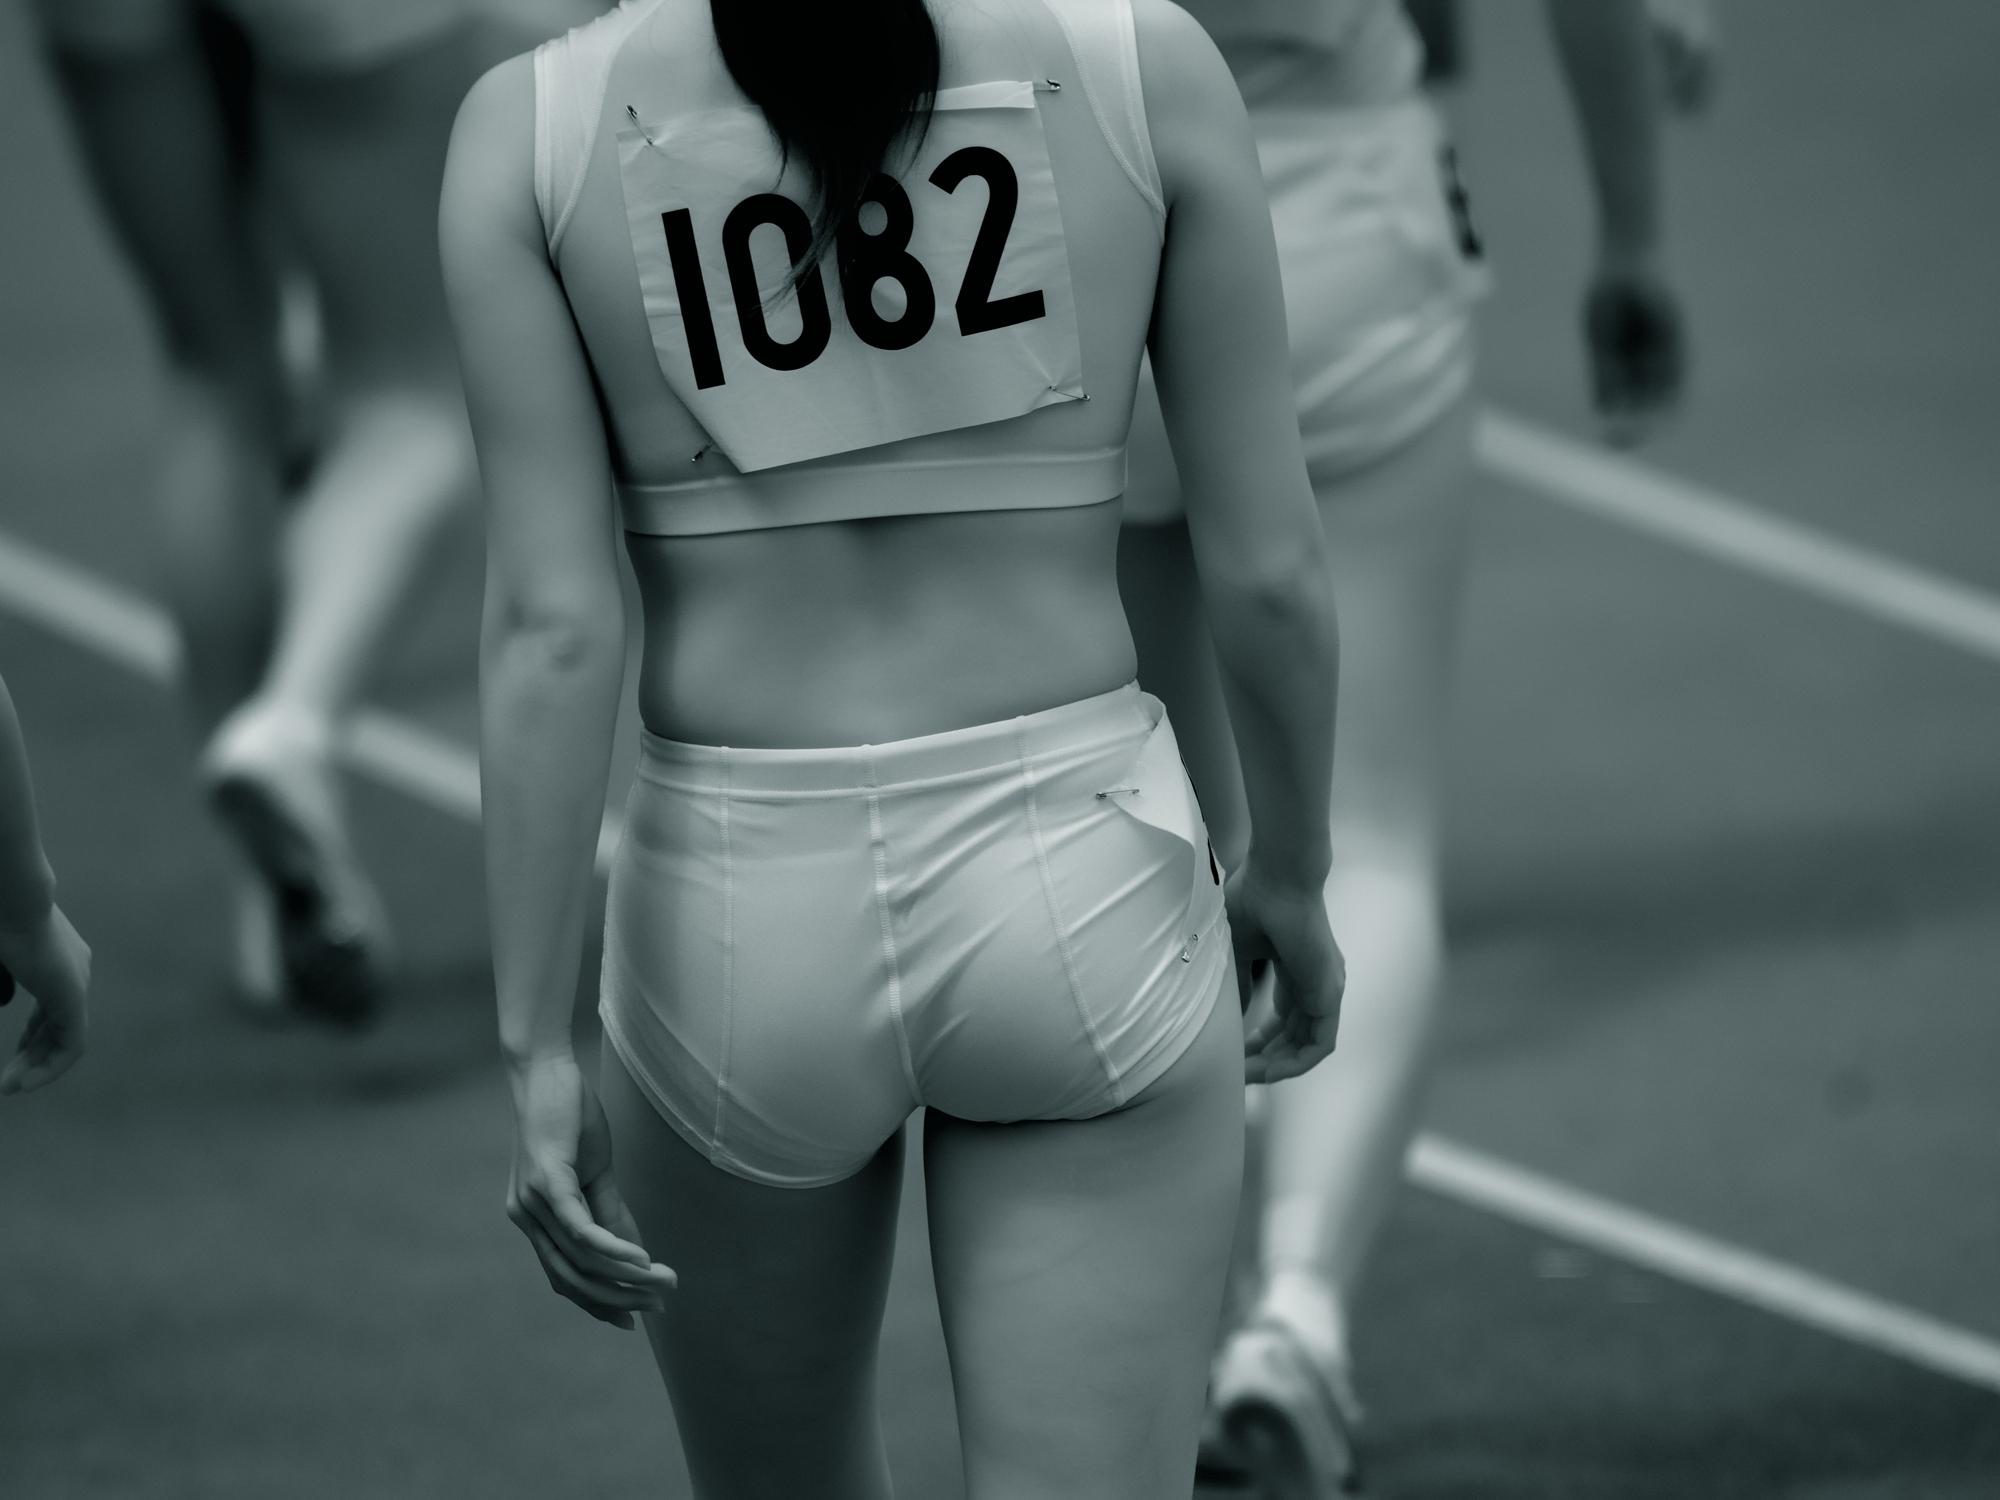 Infrared 9 Student Athletics See-through from cute pants to mature pants [High resolution]